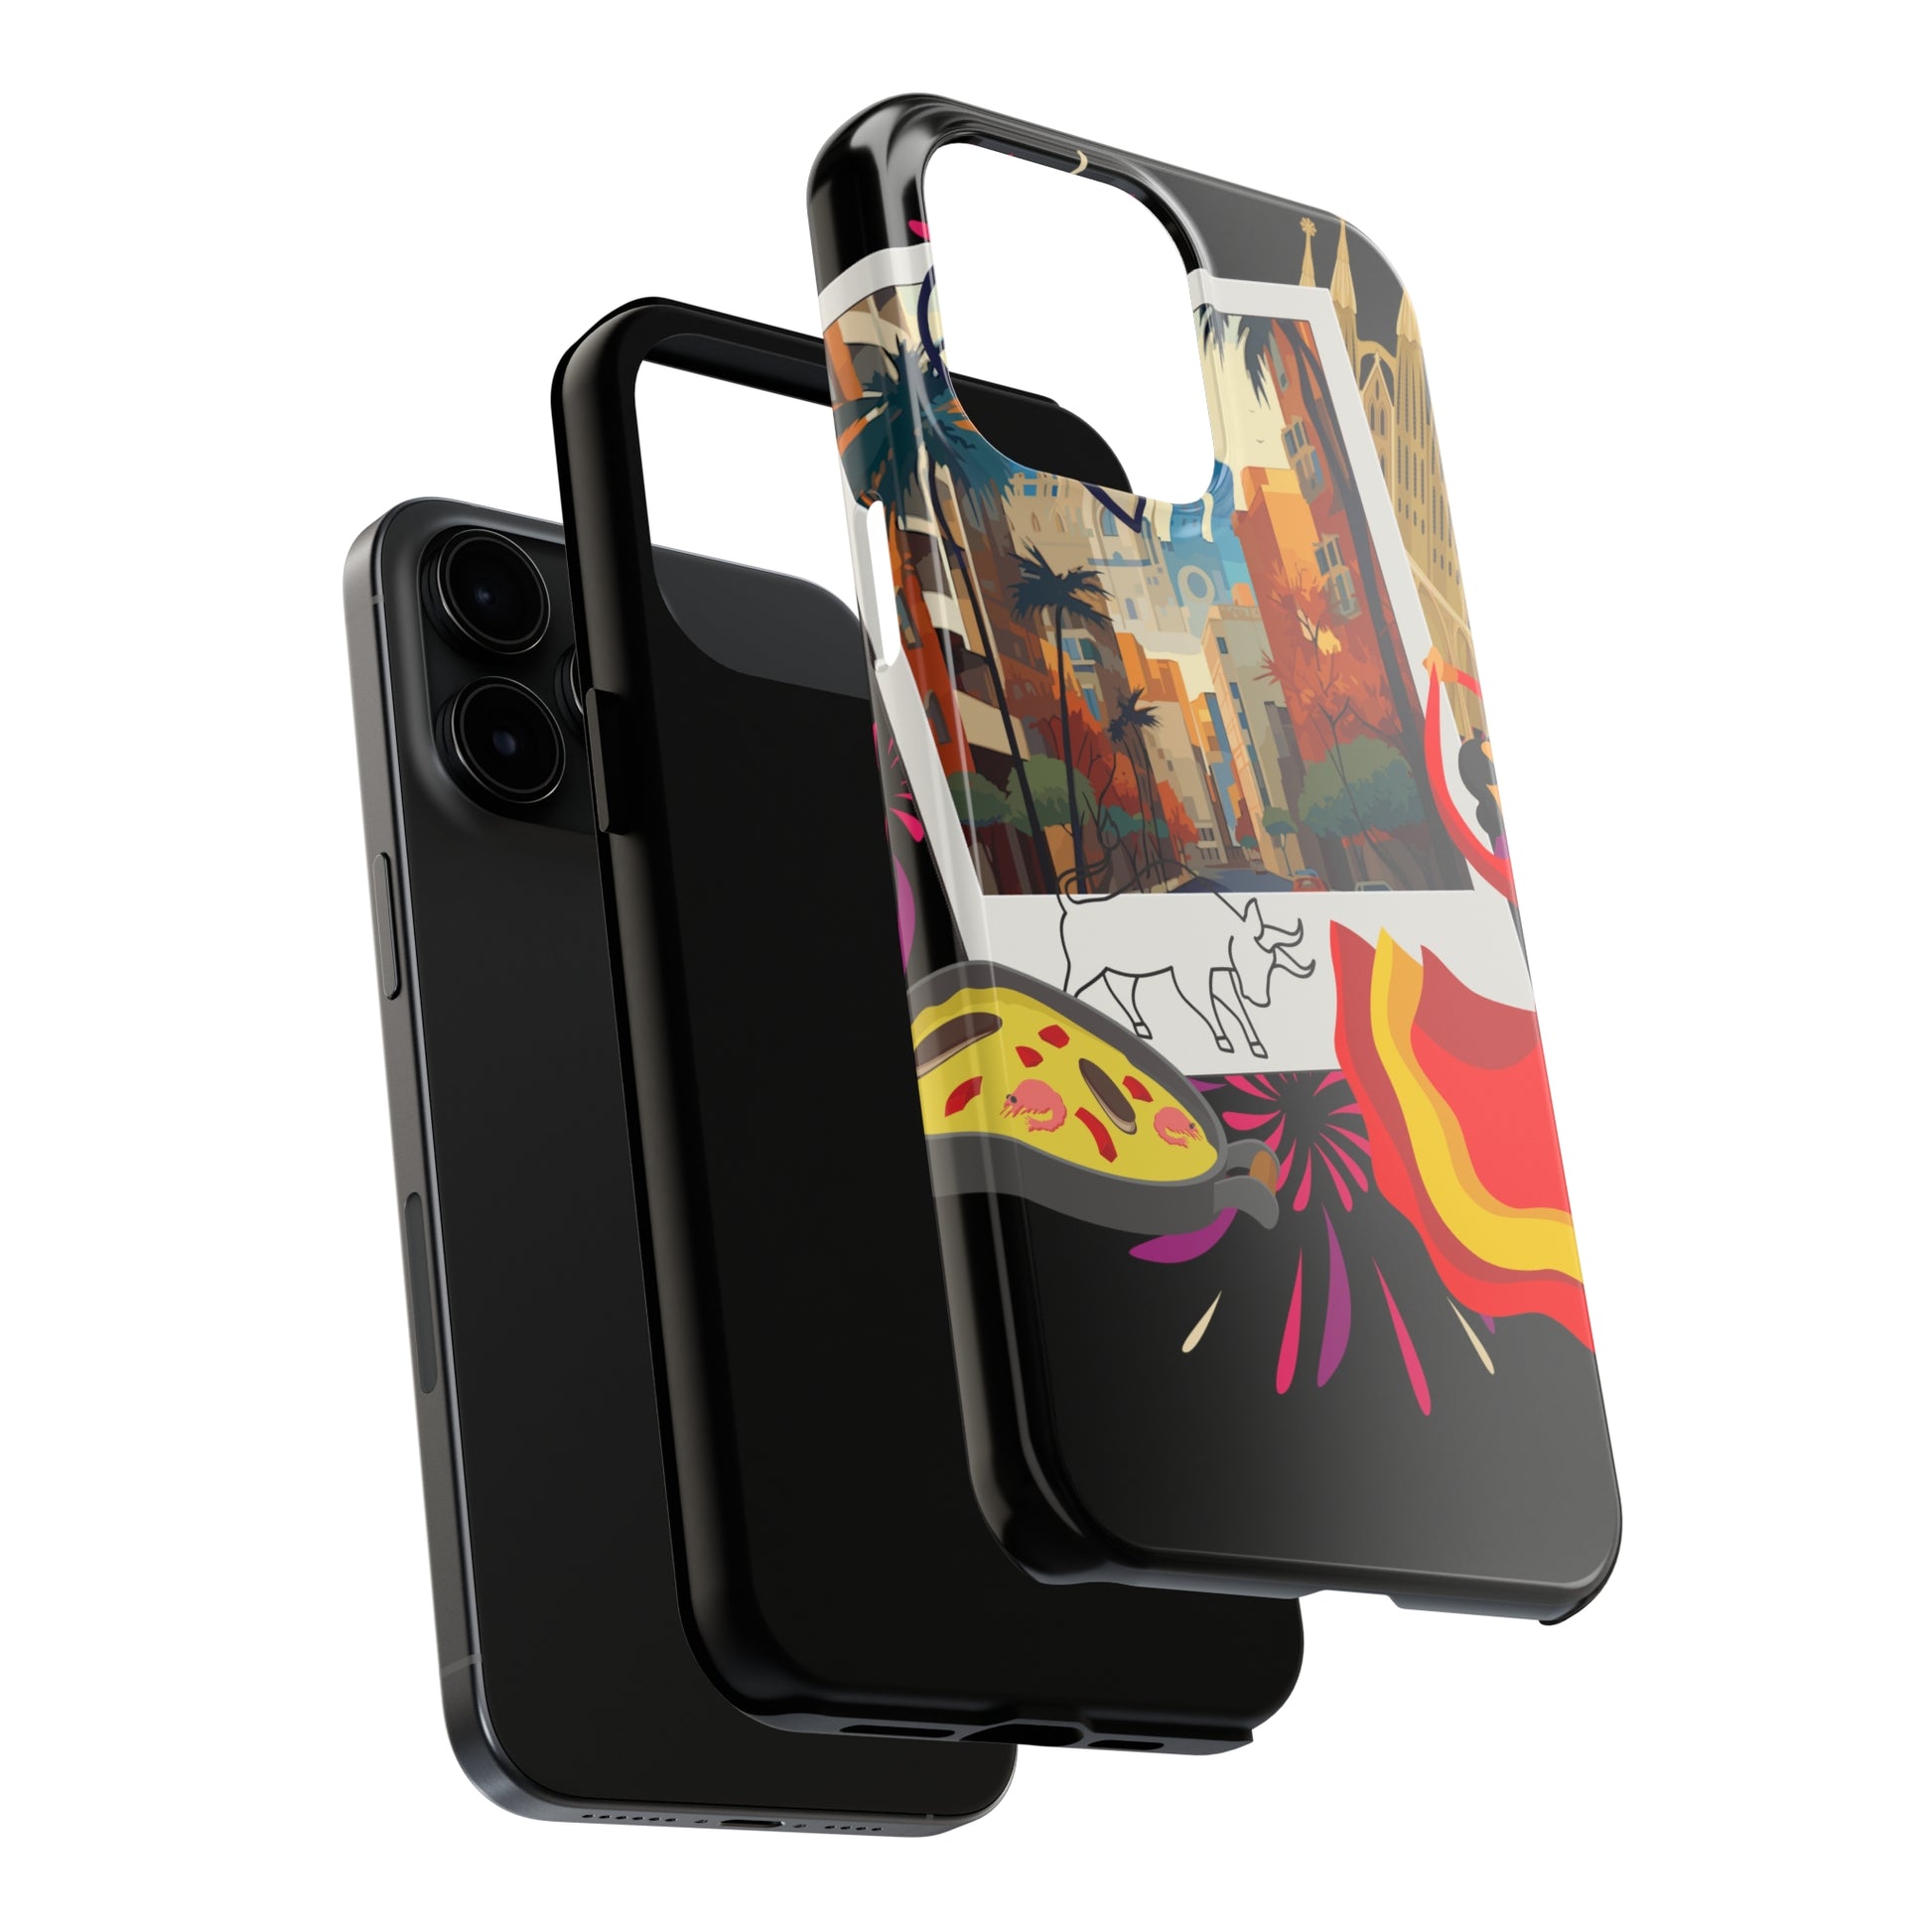 Hola Madrid: iPhone - Tough iPhone Case Design - Wireless Charging - Superior Protection - Original Designs by TheGlassyLass.com